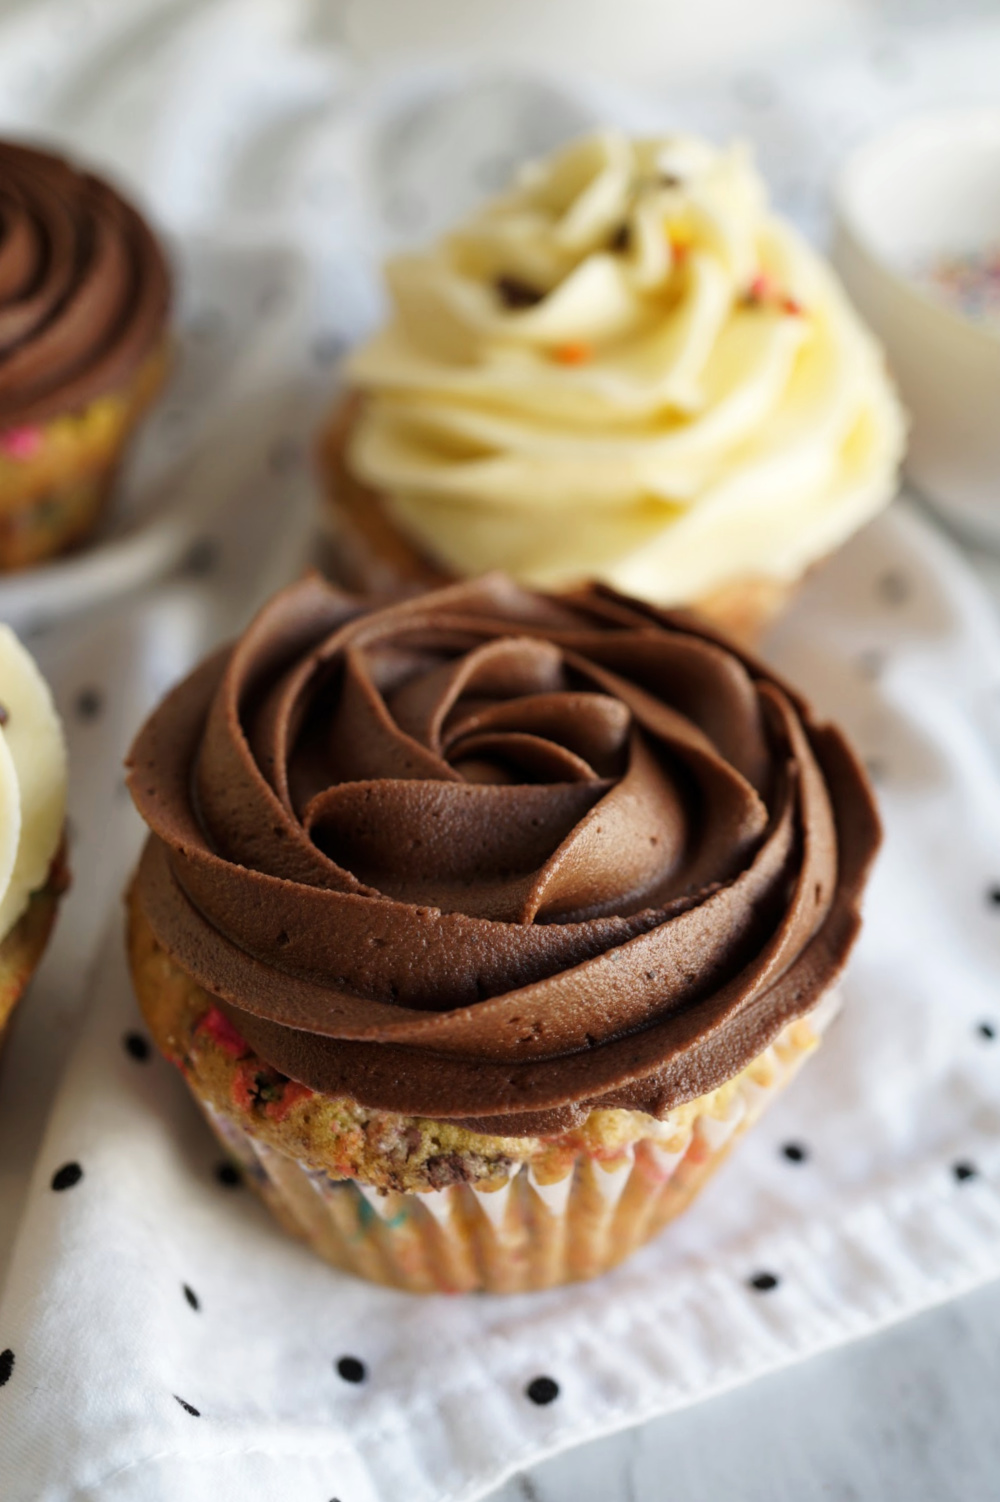 cupcake with chocolate frosting